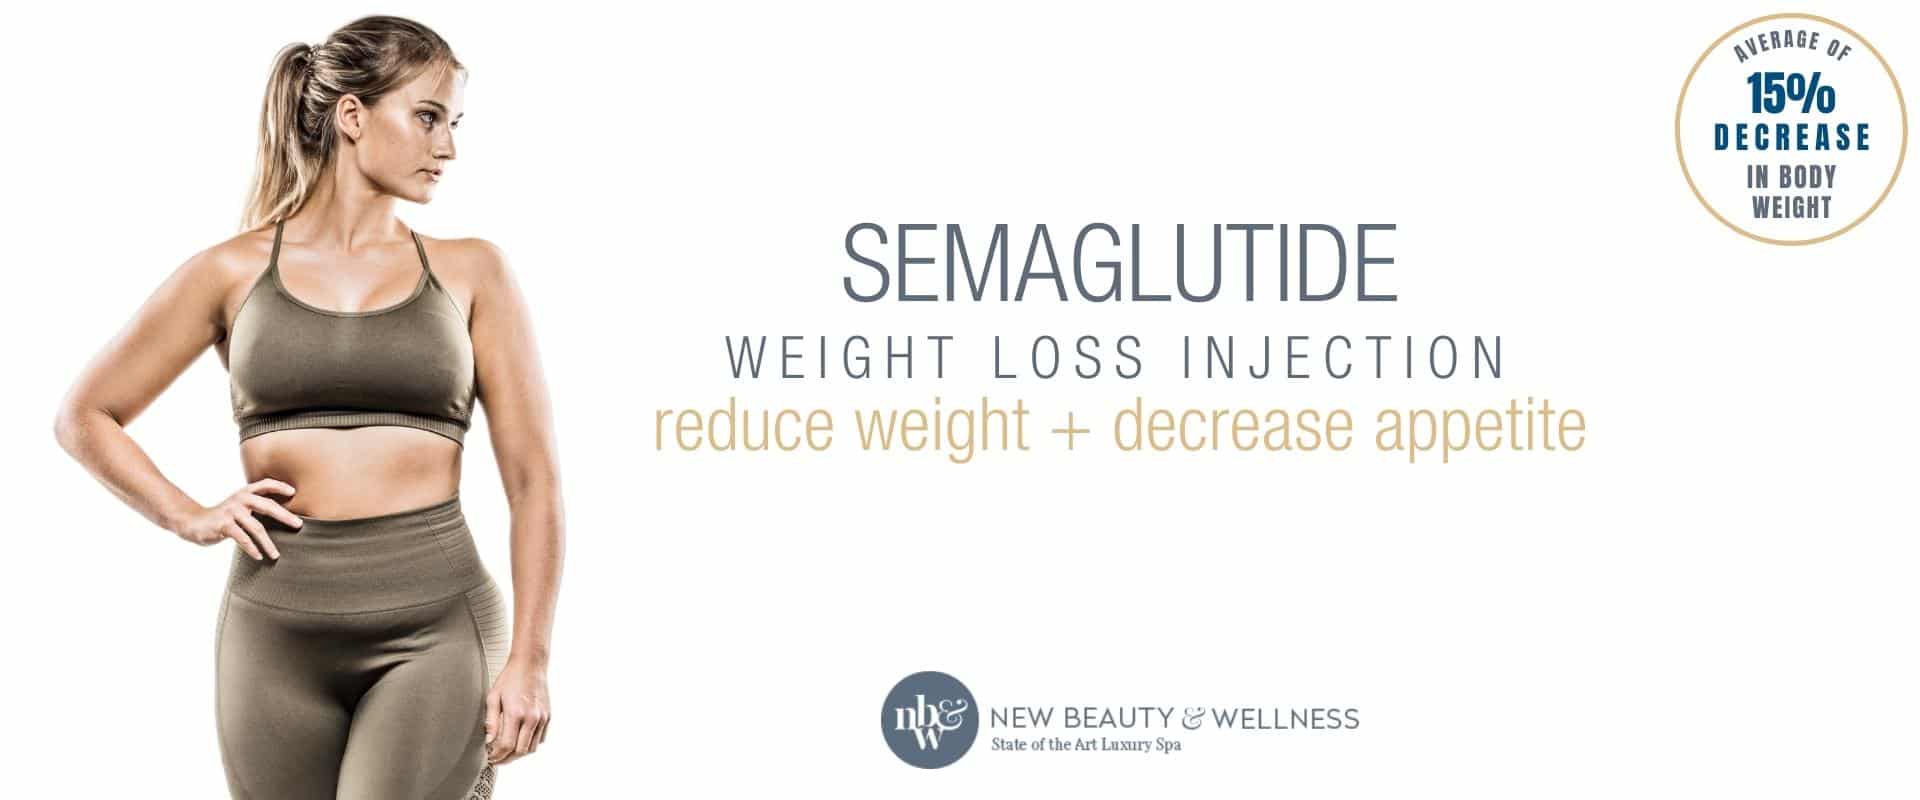 semaglutide-weight-loss-injections-westport-ct-new-beauty-and-wellness-desktop